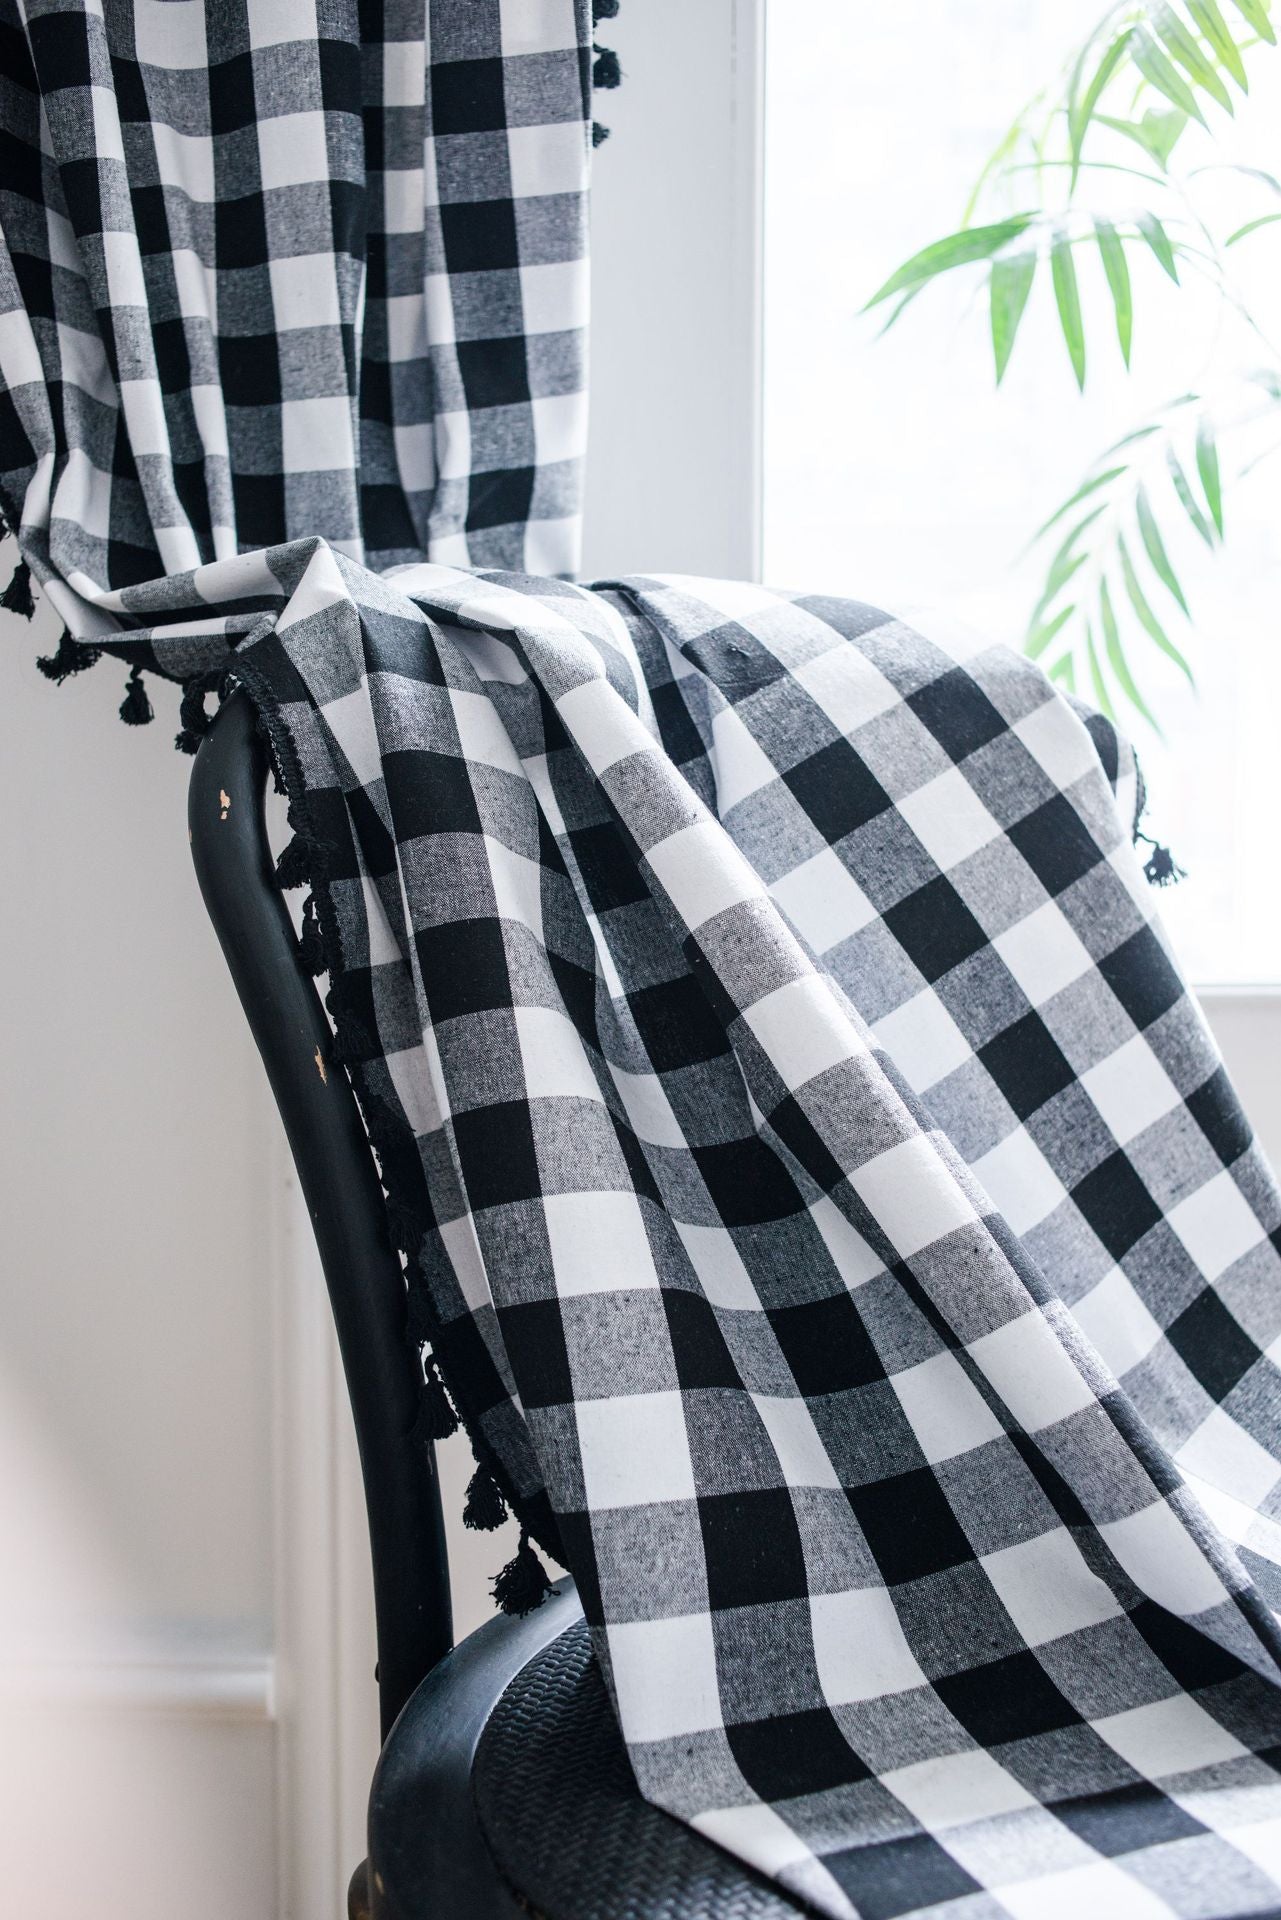 Classic Black and White Curtains Checkered Window Drapes with Tassels